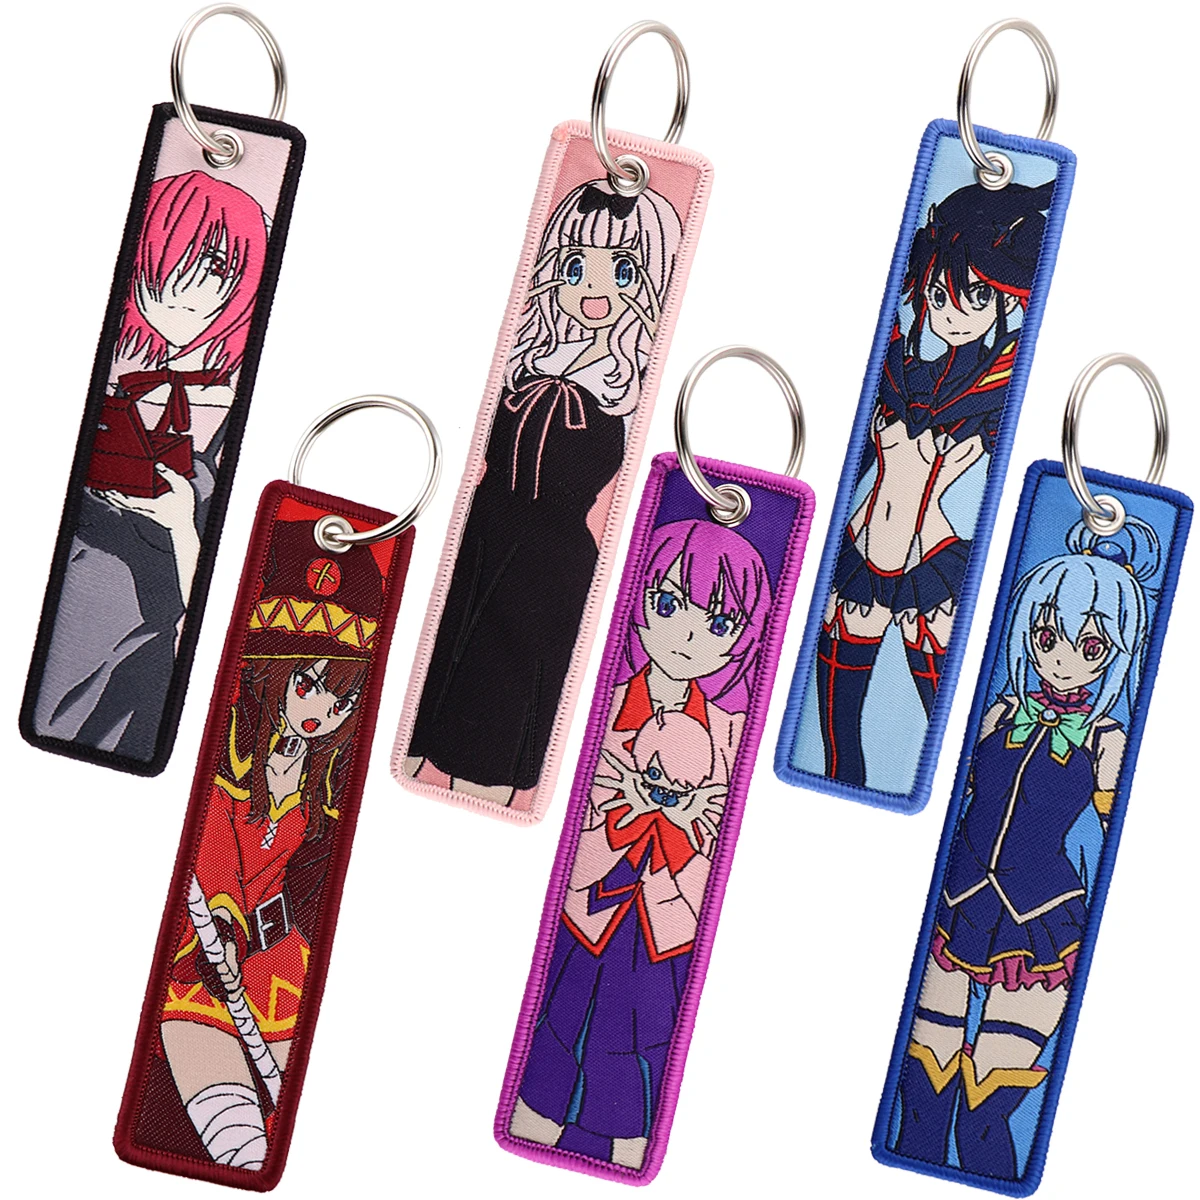 

Anime Jet Tag Embroidered Keys Tag Keychains for Men Keyring Car Keys Adorn Jewelry Accessories Fans Gifts 1PCS